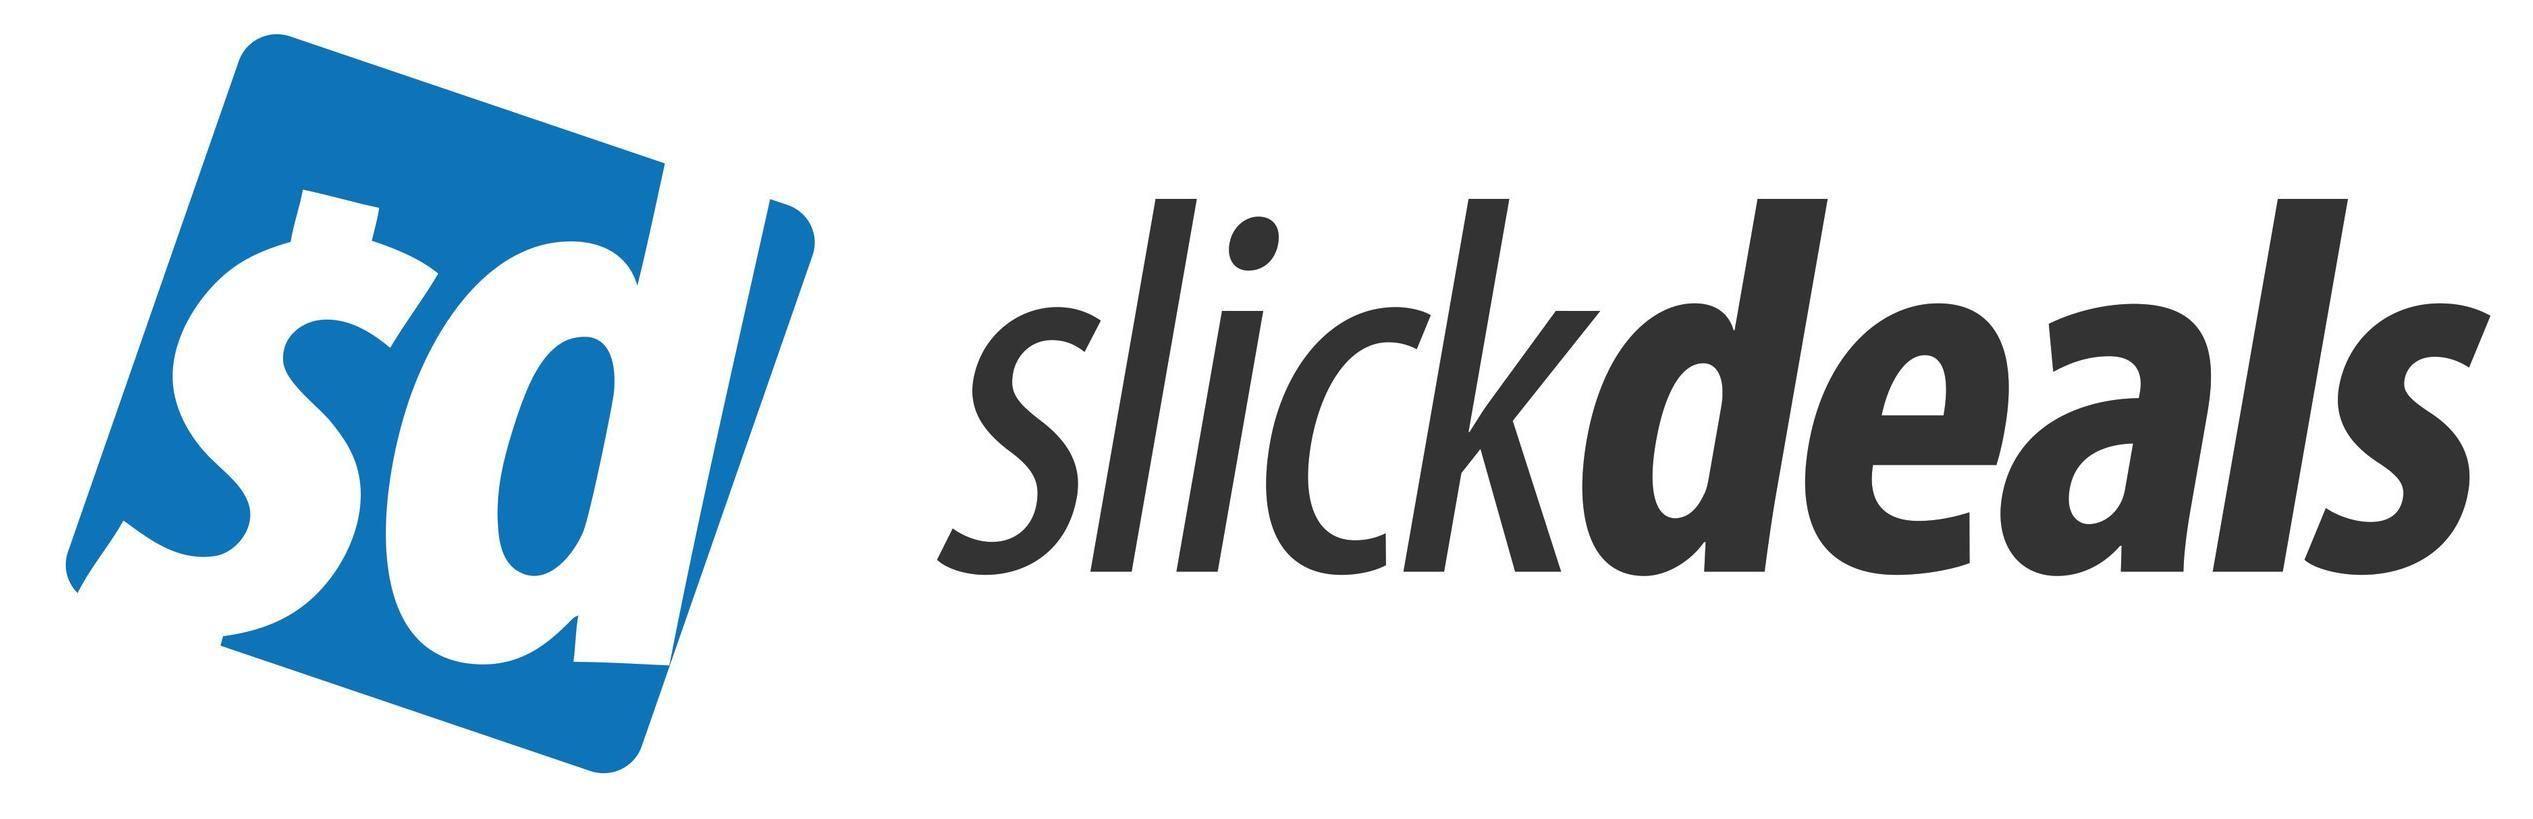 Slickdeals Logo - Slickdeals Competitors, Revenue and Employees Company Profile